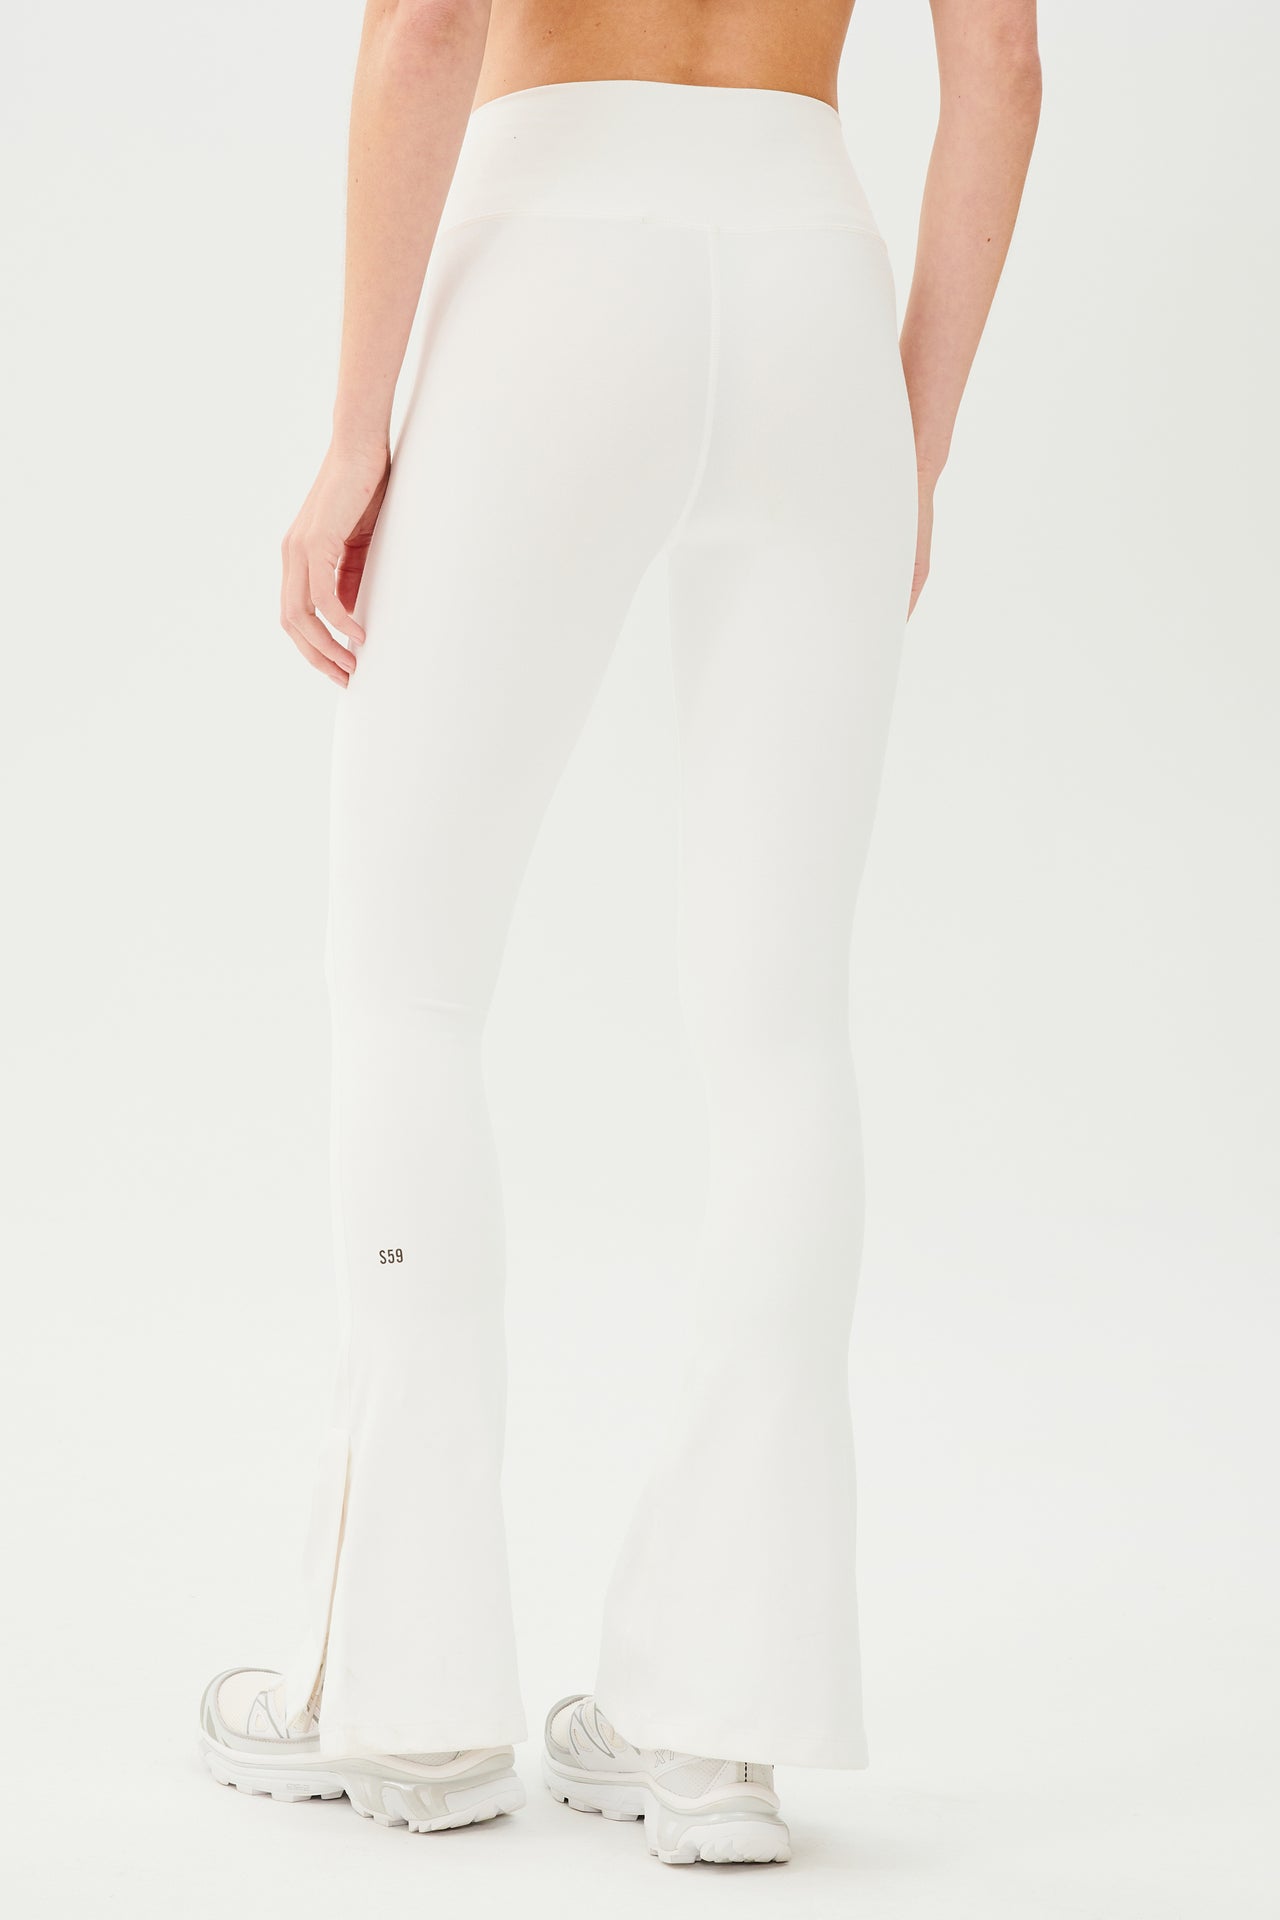 The back view of a woman wearing SPLITS59 Raquel High Waist Flare w/ Split Hem - White leggings made from 4-way stretch fabric.